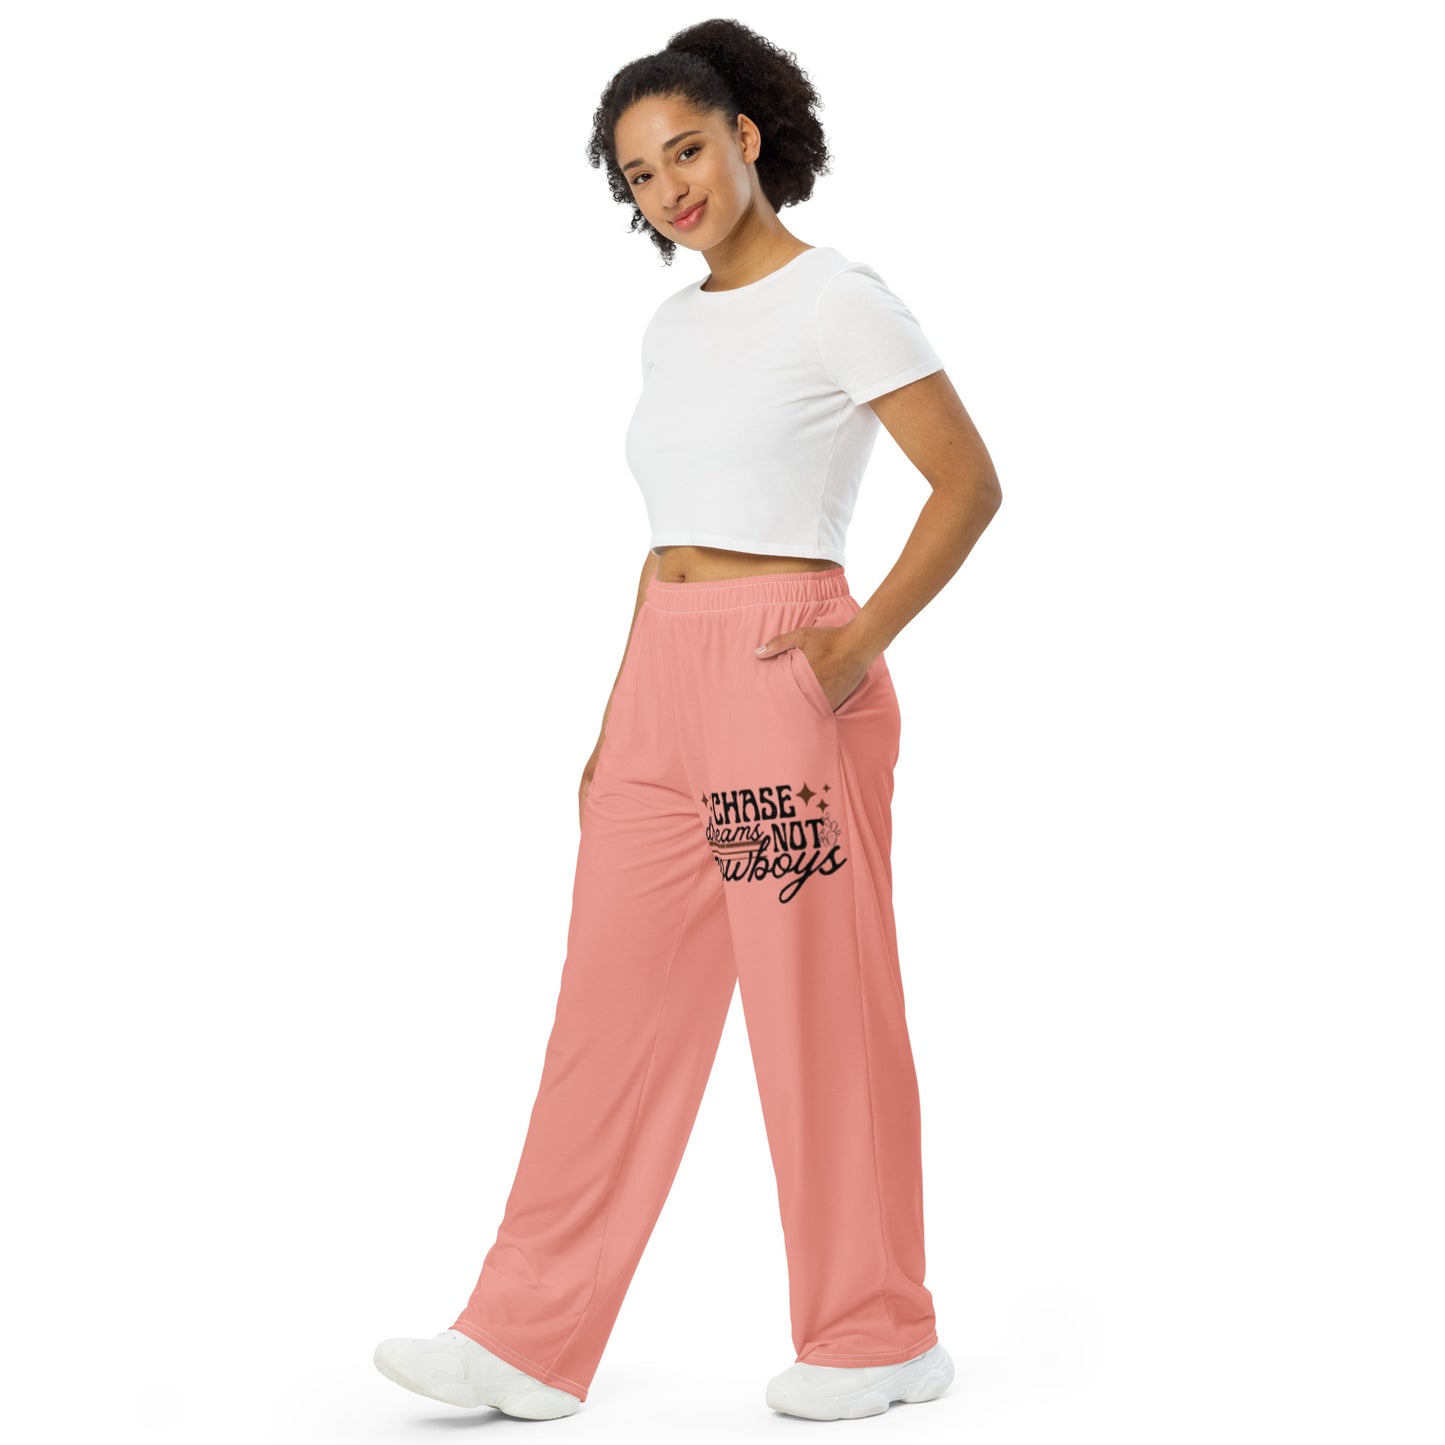 Chase Dreams - All-over print unisex wide-leg pants